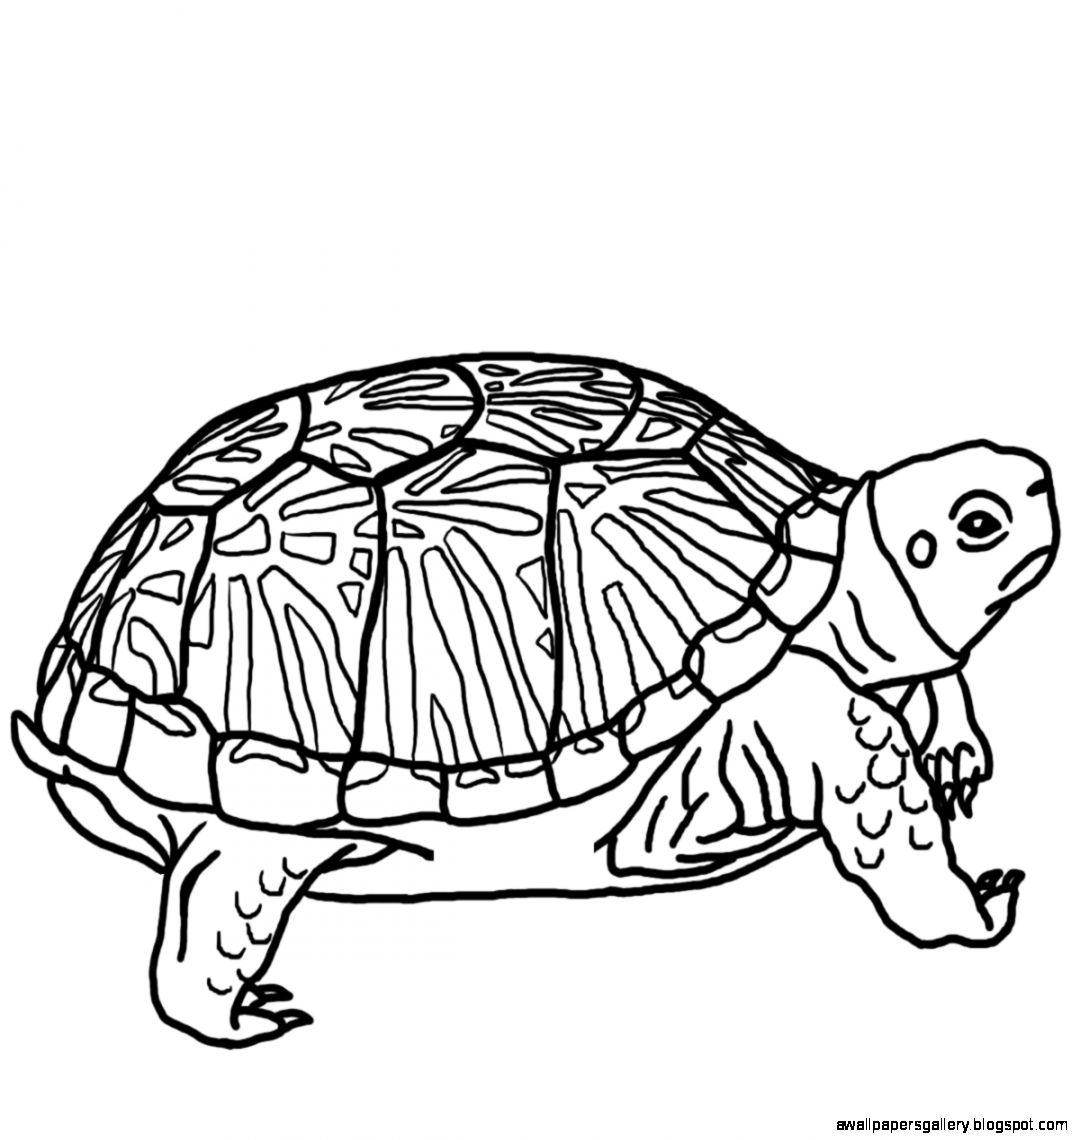 Turtle clipart black and white wallpapers gallery